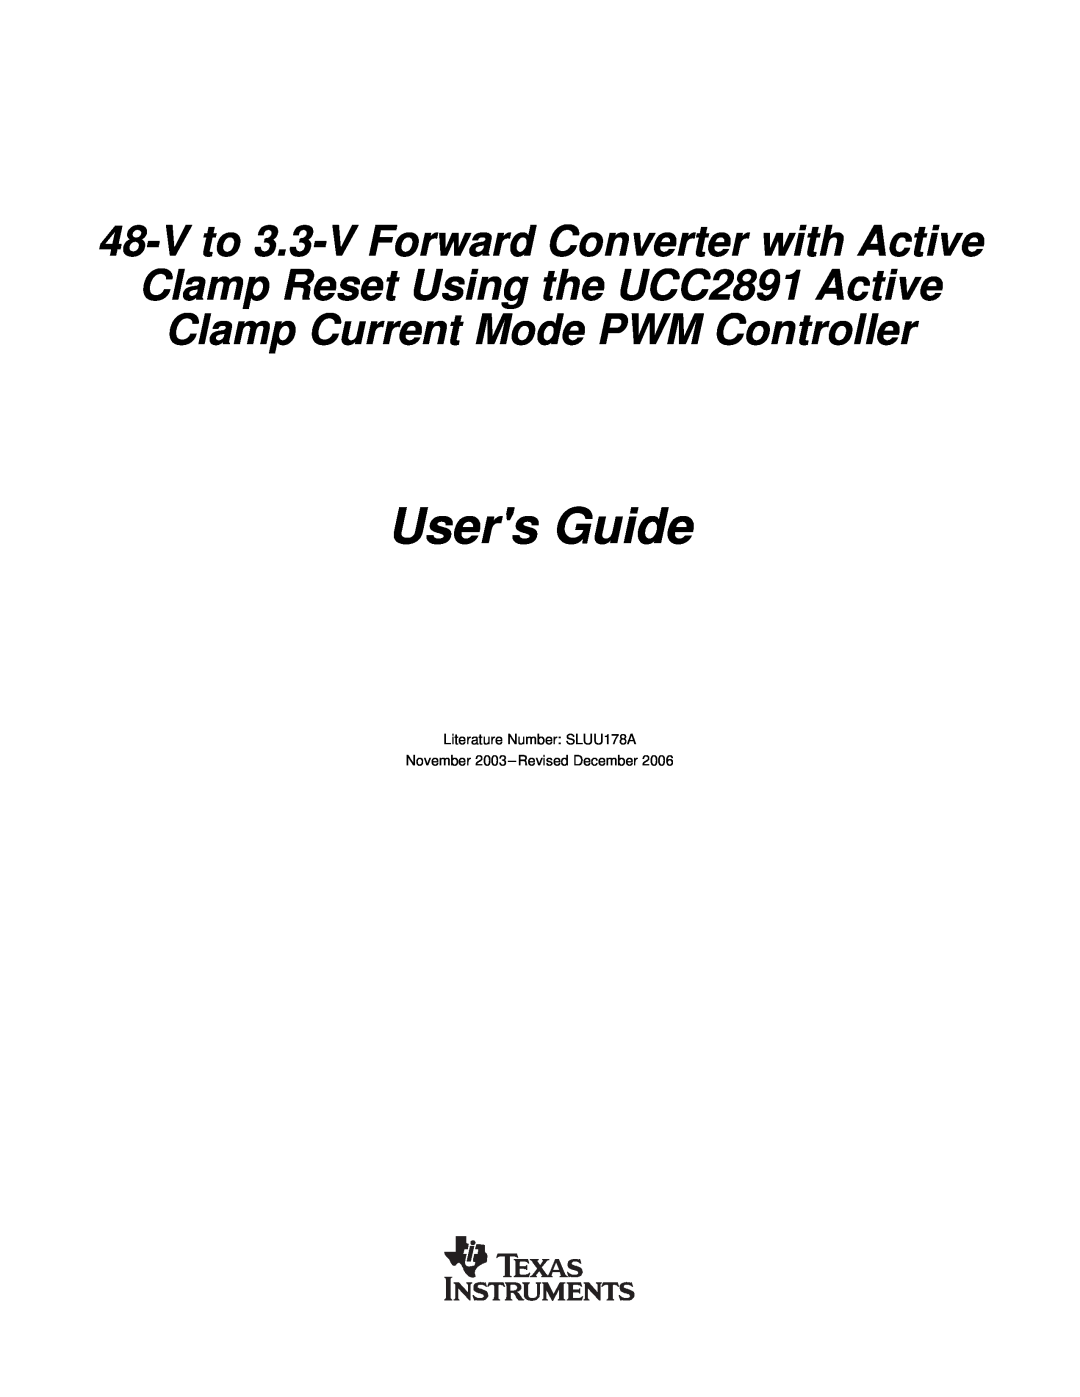 Texas Instruments UCC2891 manual Users Guide, V to 3.3-V Forward Converter with Active 